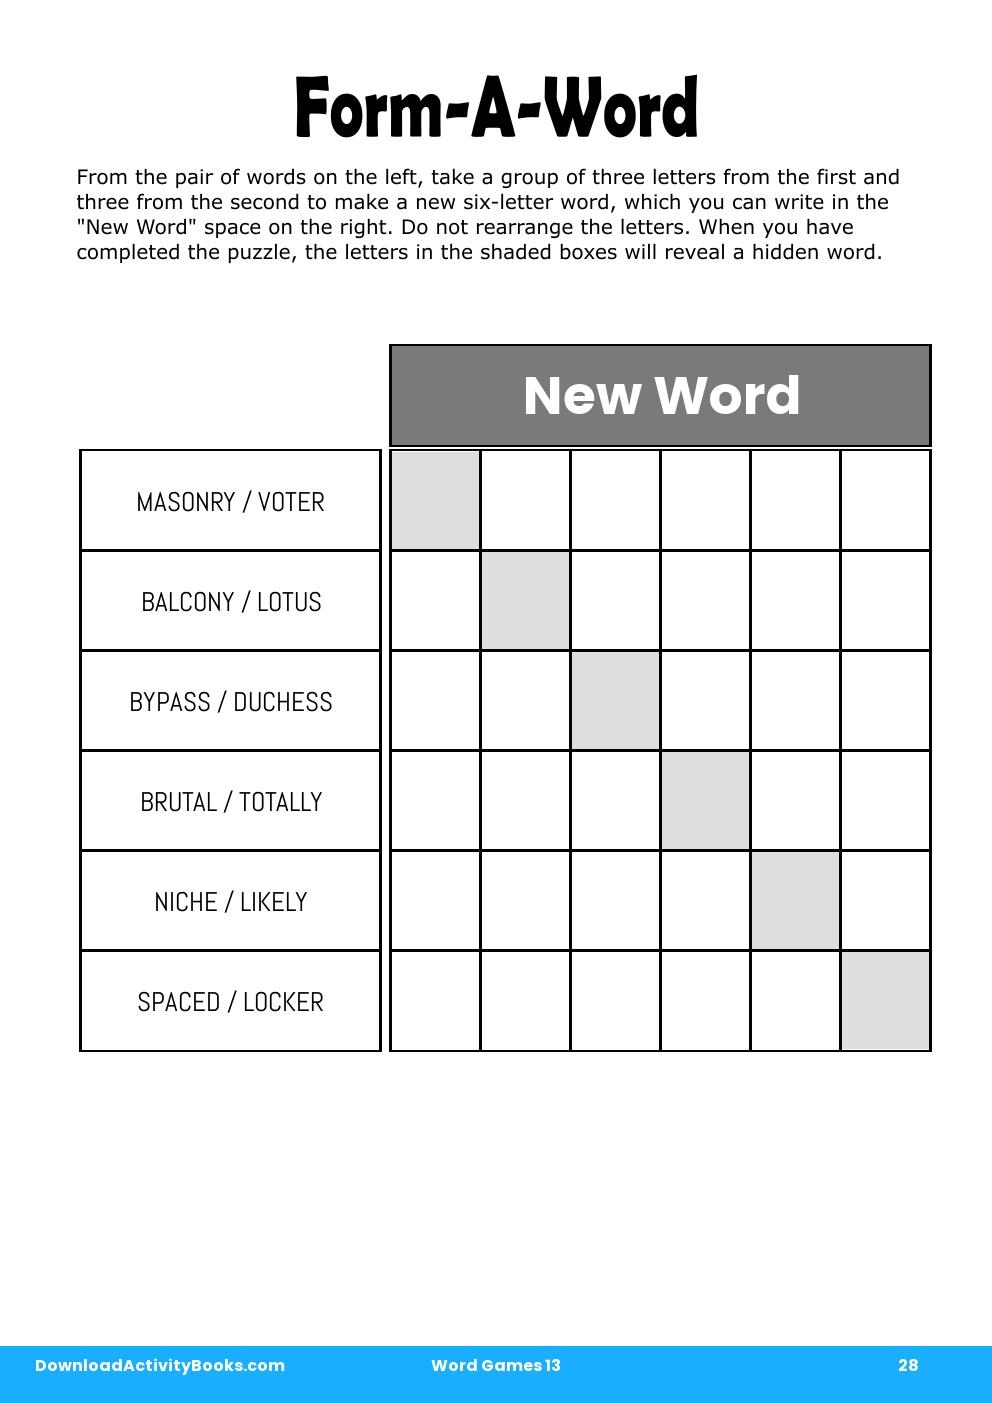 Form-A-Word in Word Games 13